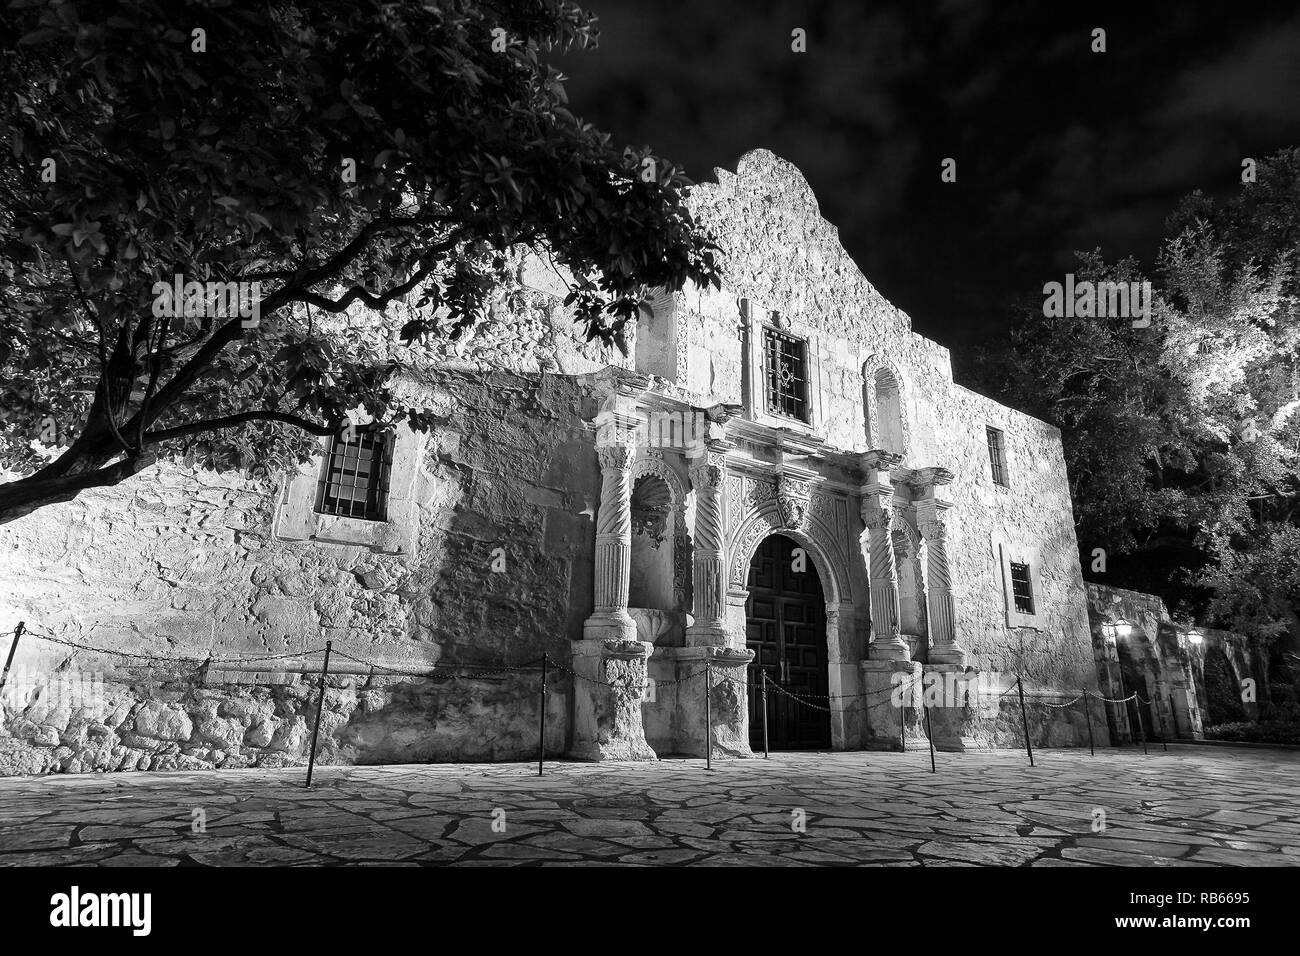 The Alamo - site of an heroic battle for Texas' independence from Mexico in 1835, San Antonio, Texas, USA Stock Photo